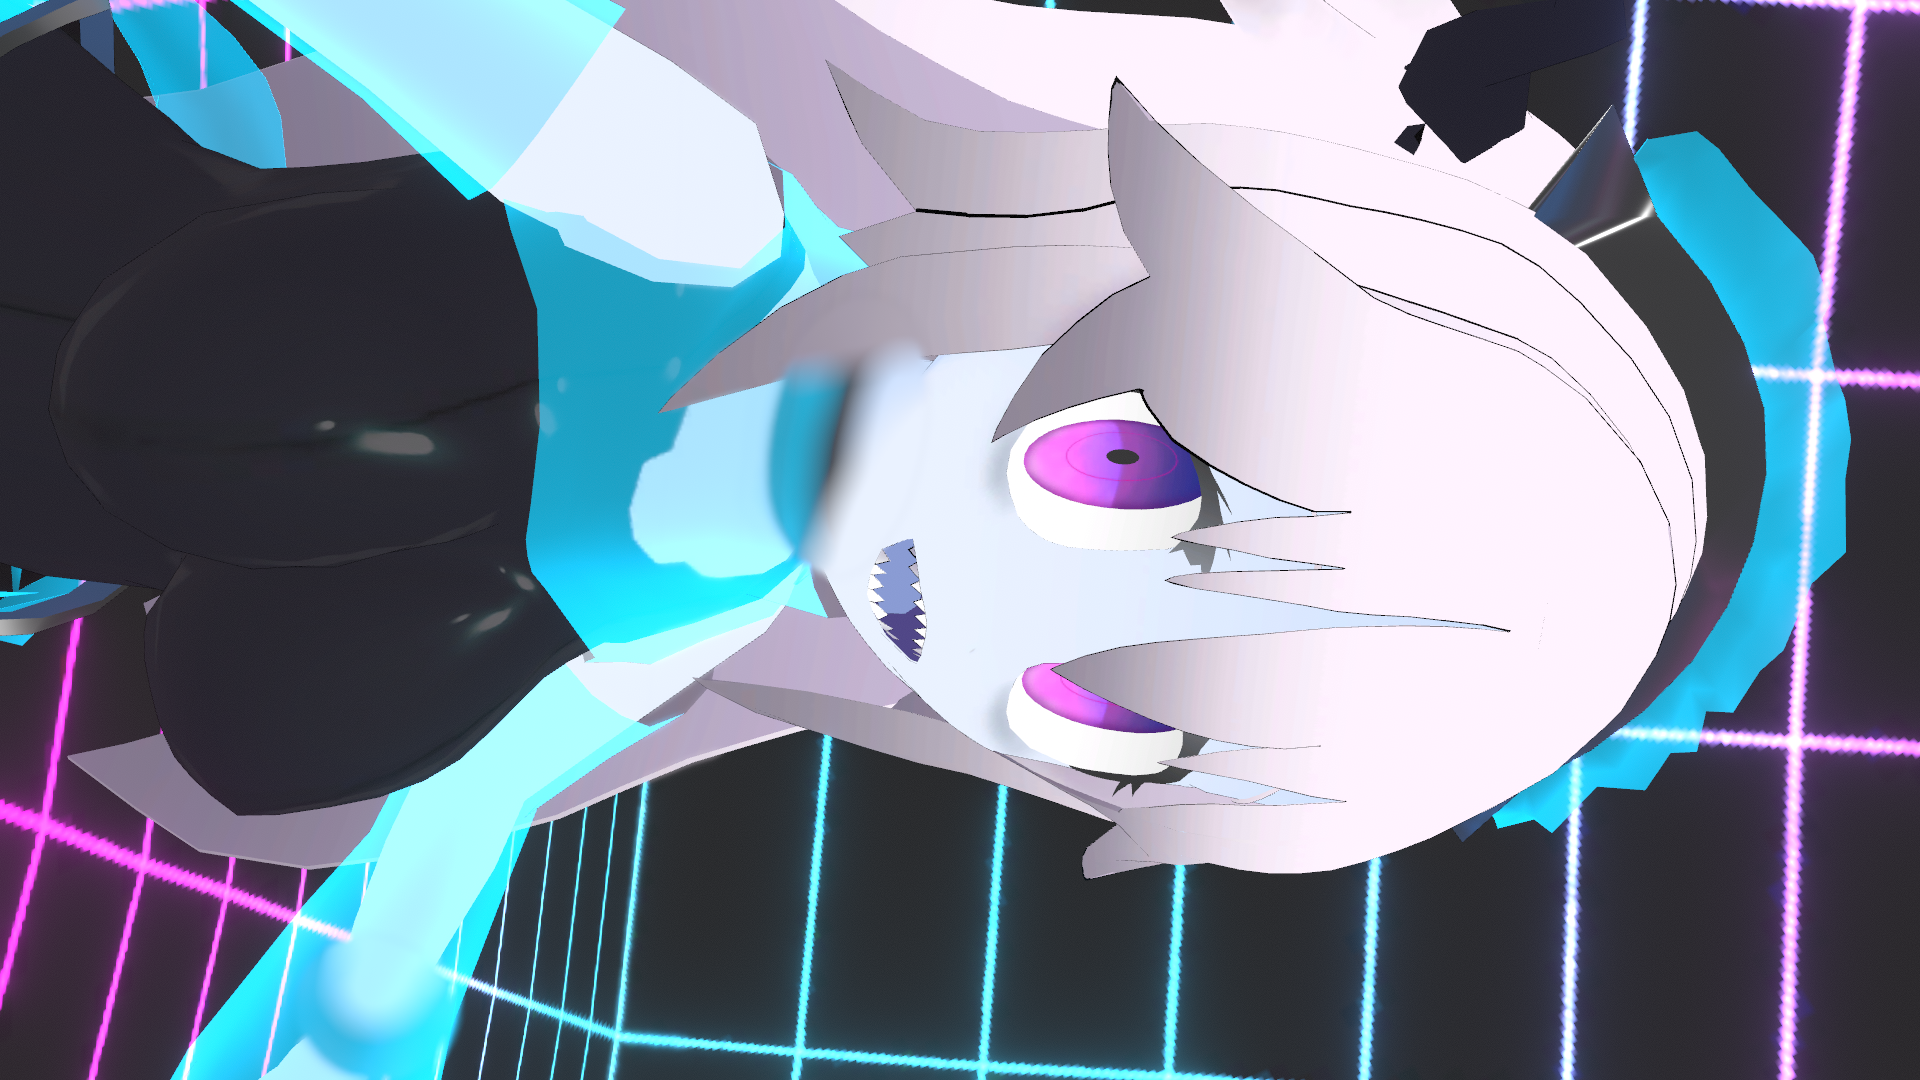 VRChat_1920x1080_2021-12-05_05-52-57.052.png